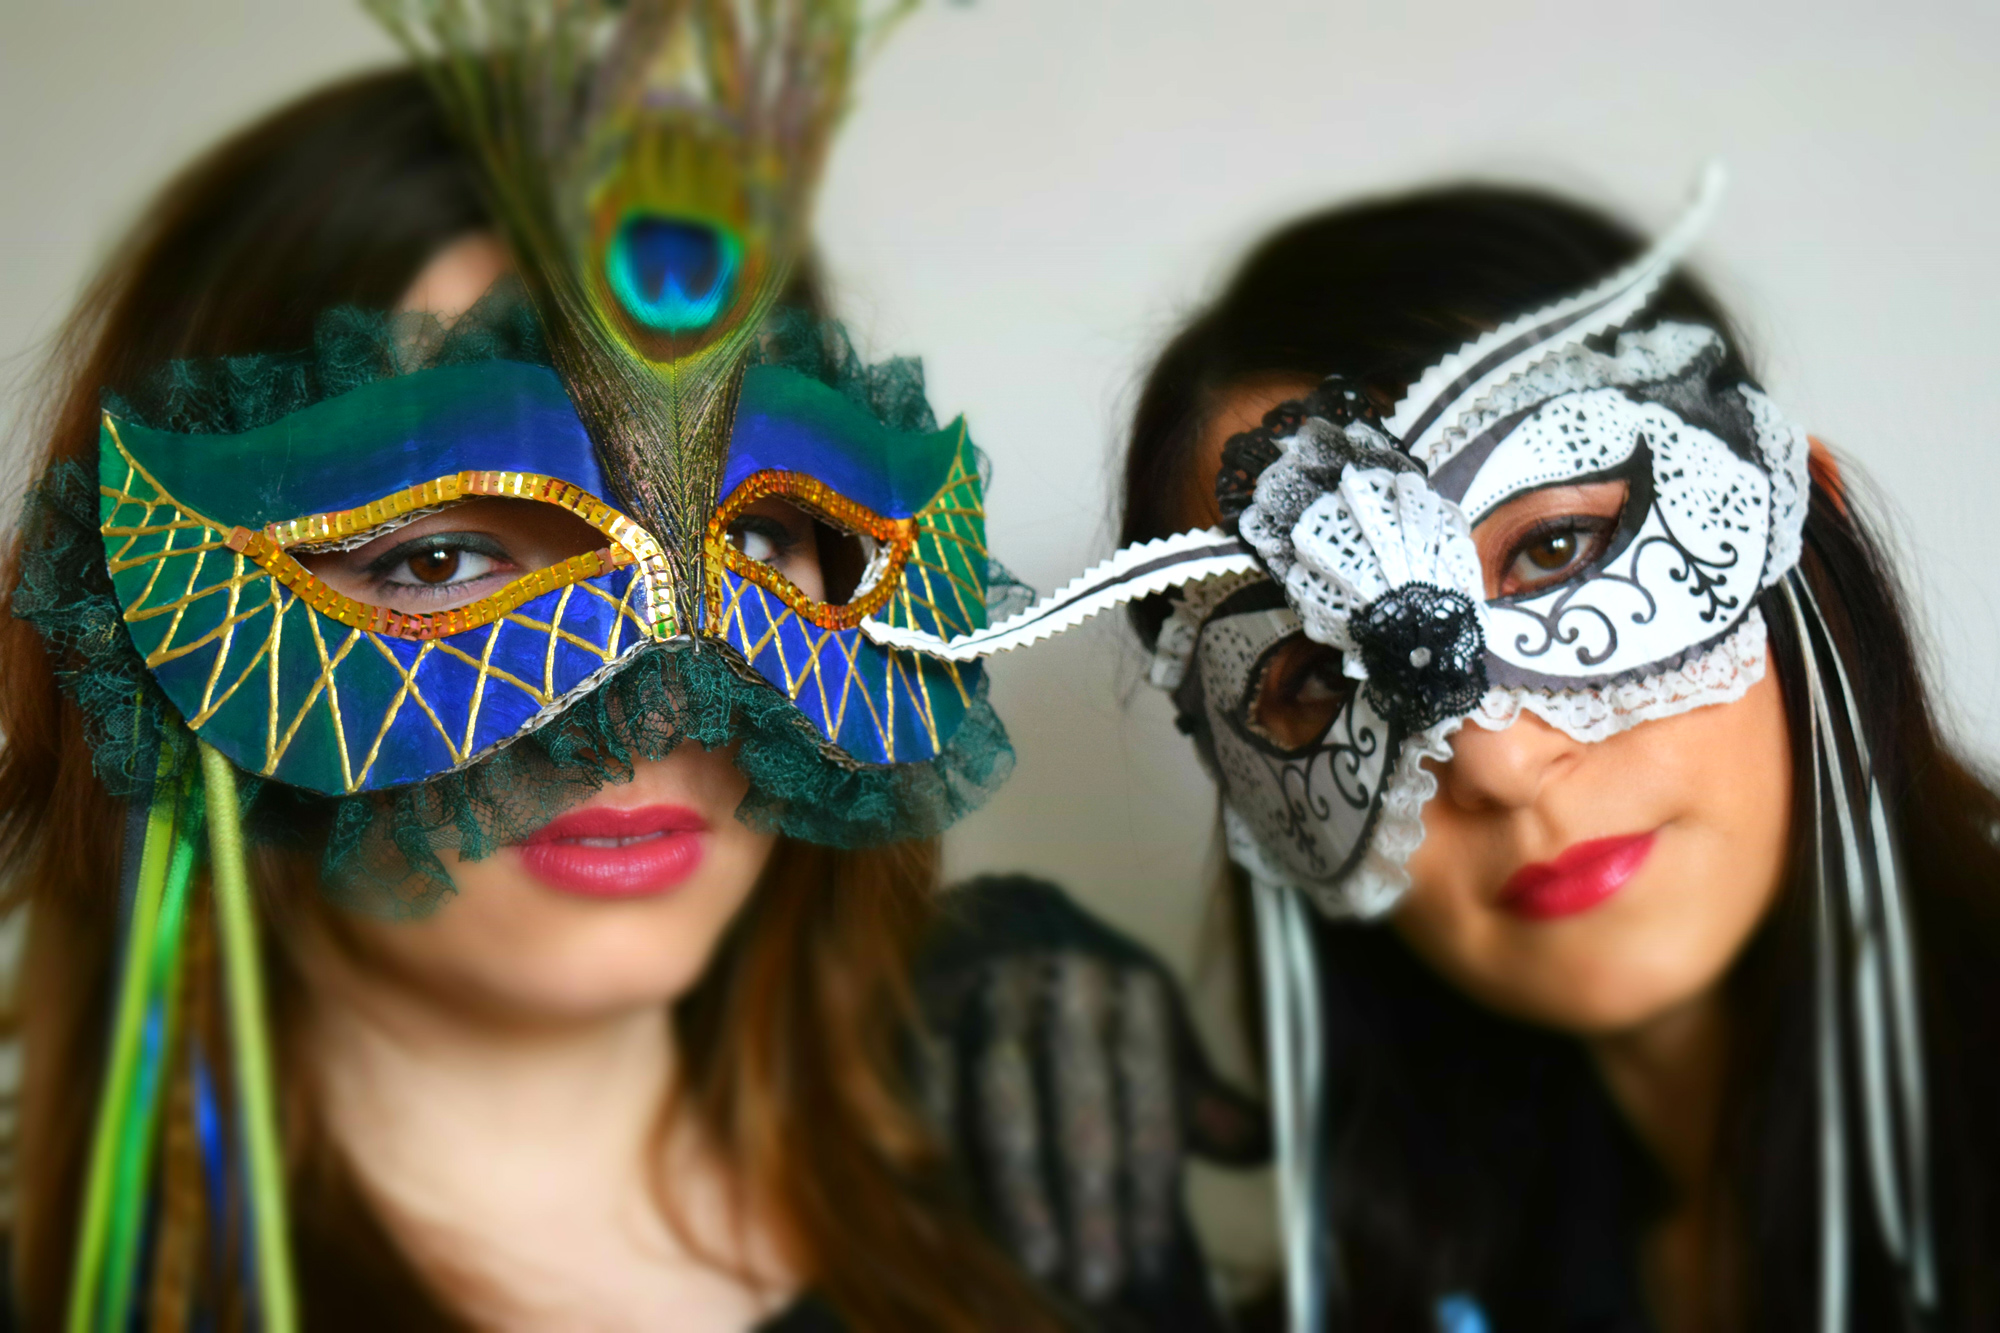 Giulia with Peacock mask and Ilaria with the Black & White mask